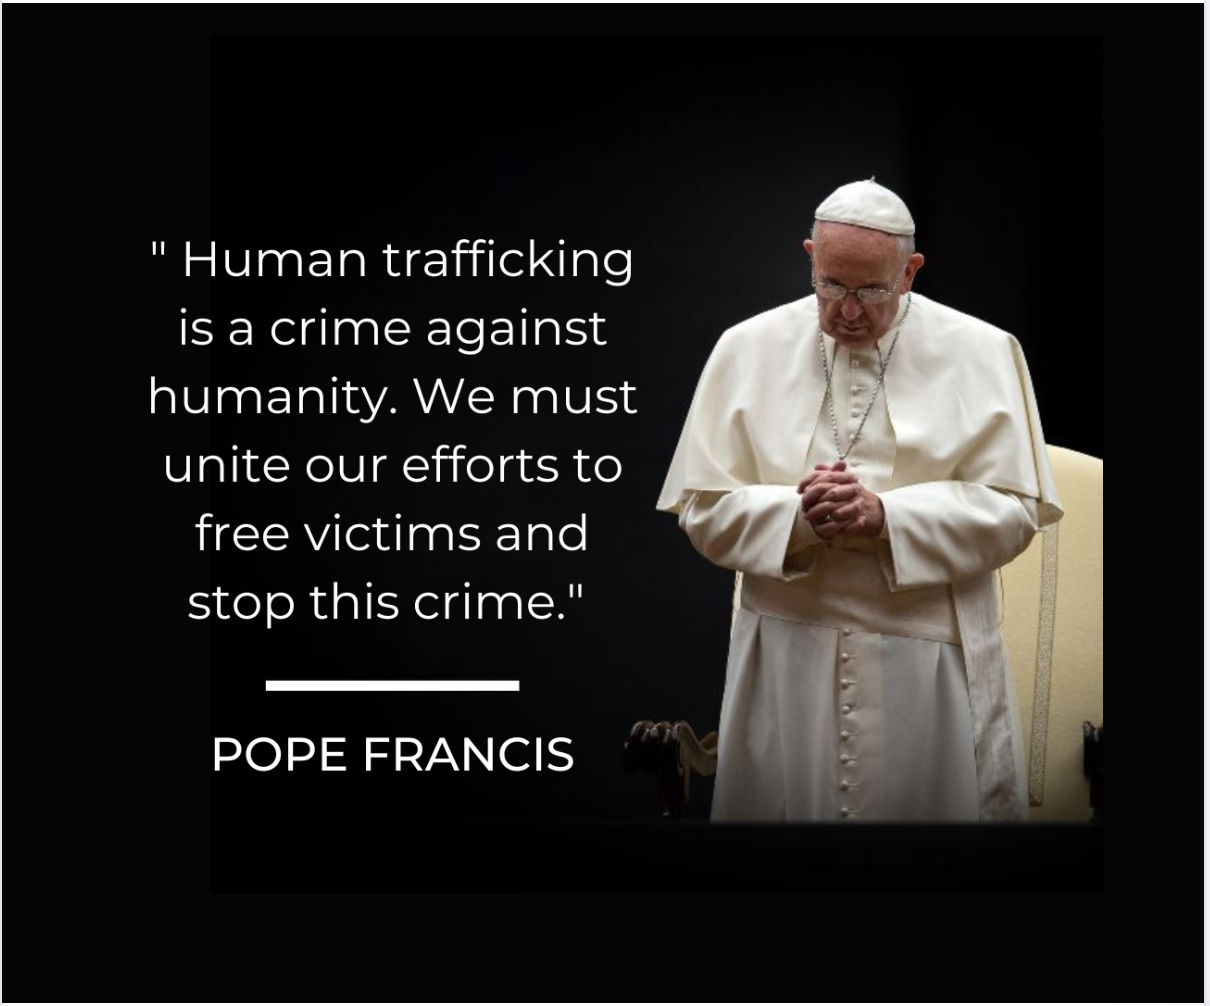 Pope Francis quote on human trafficking